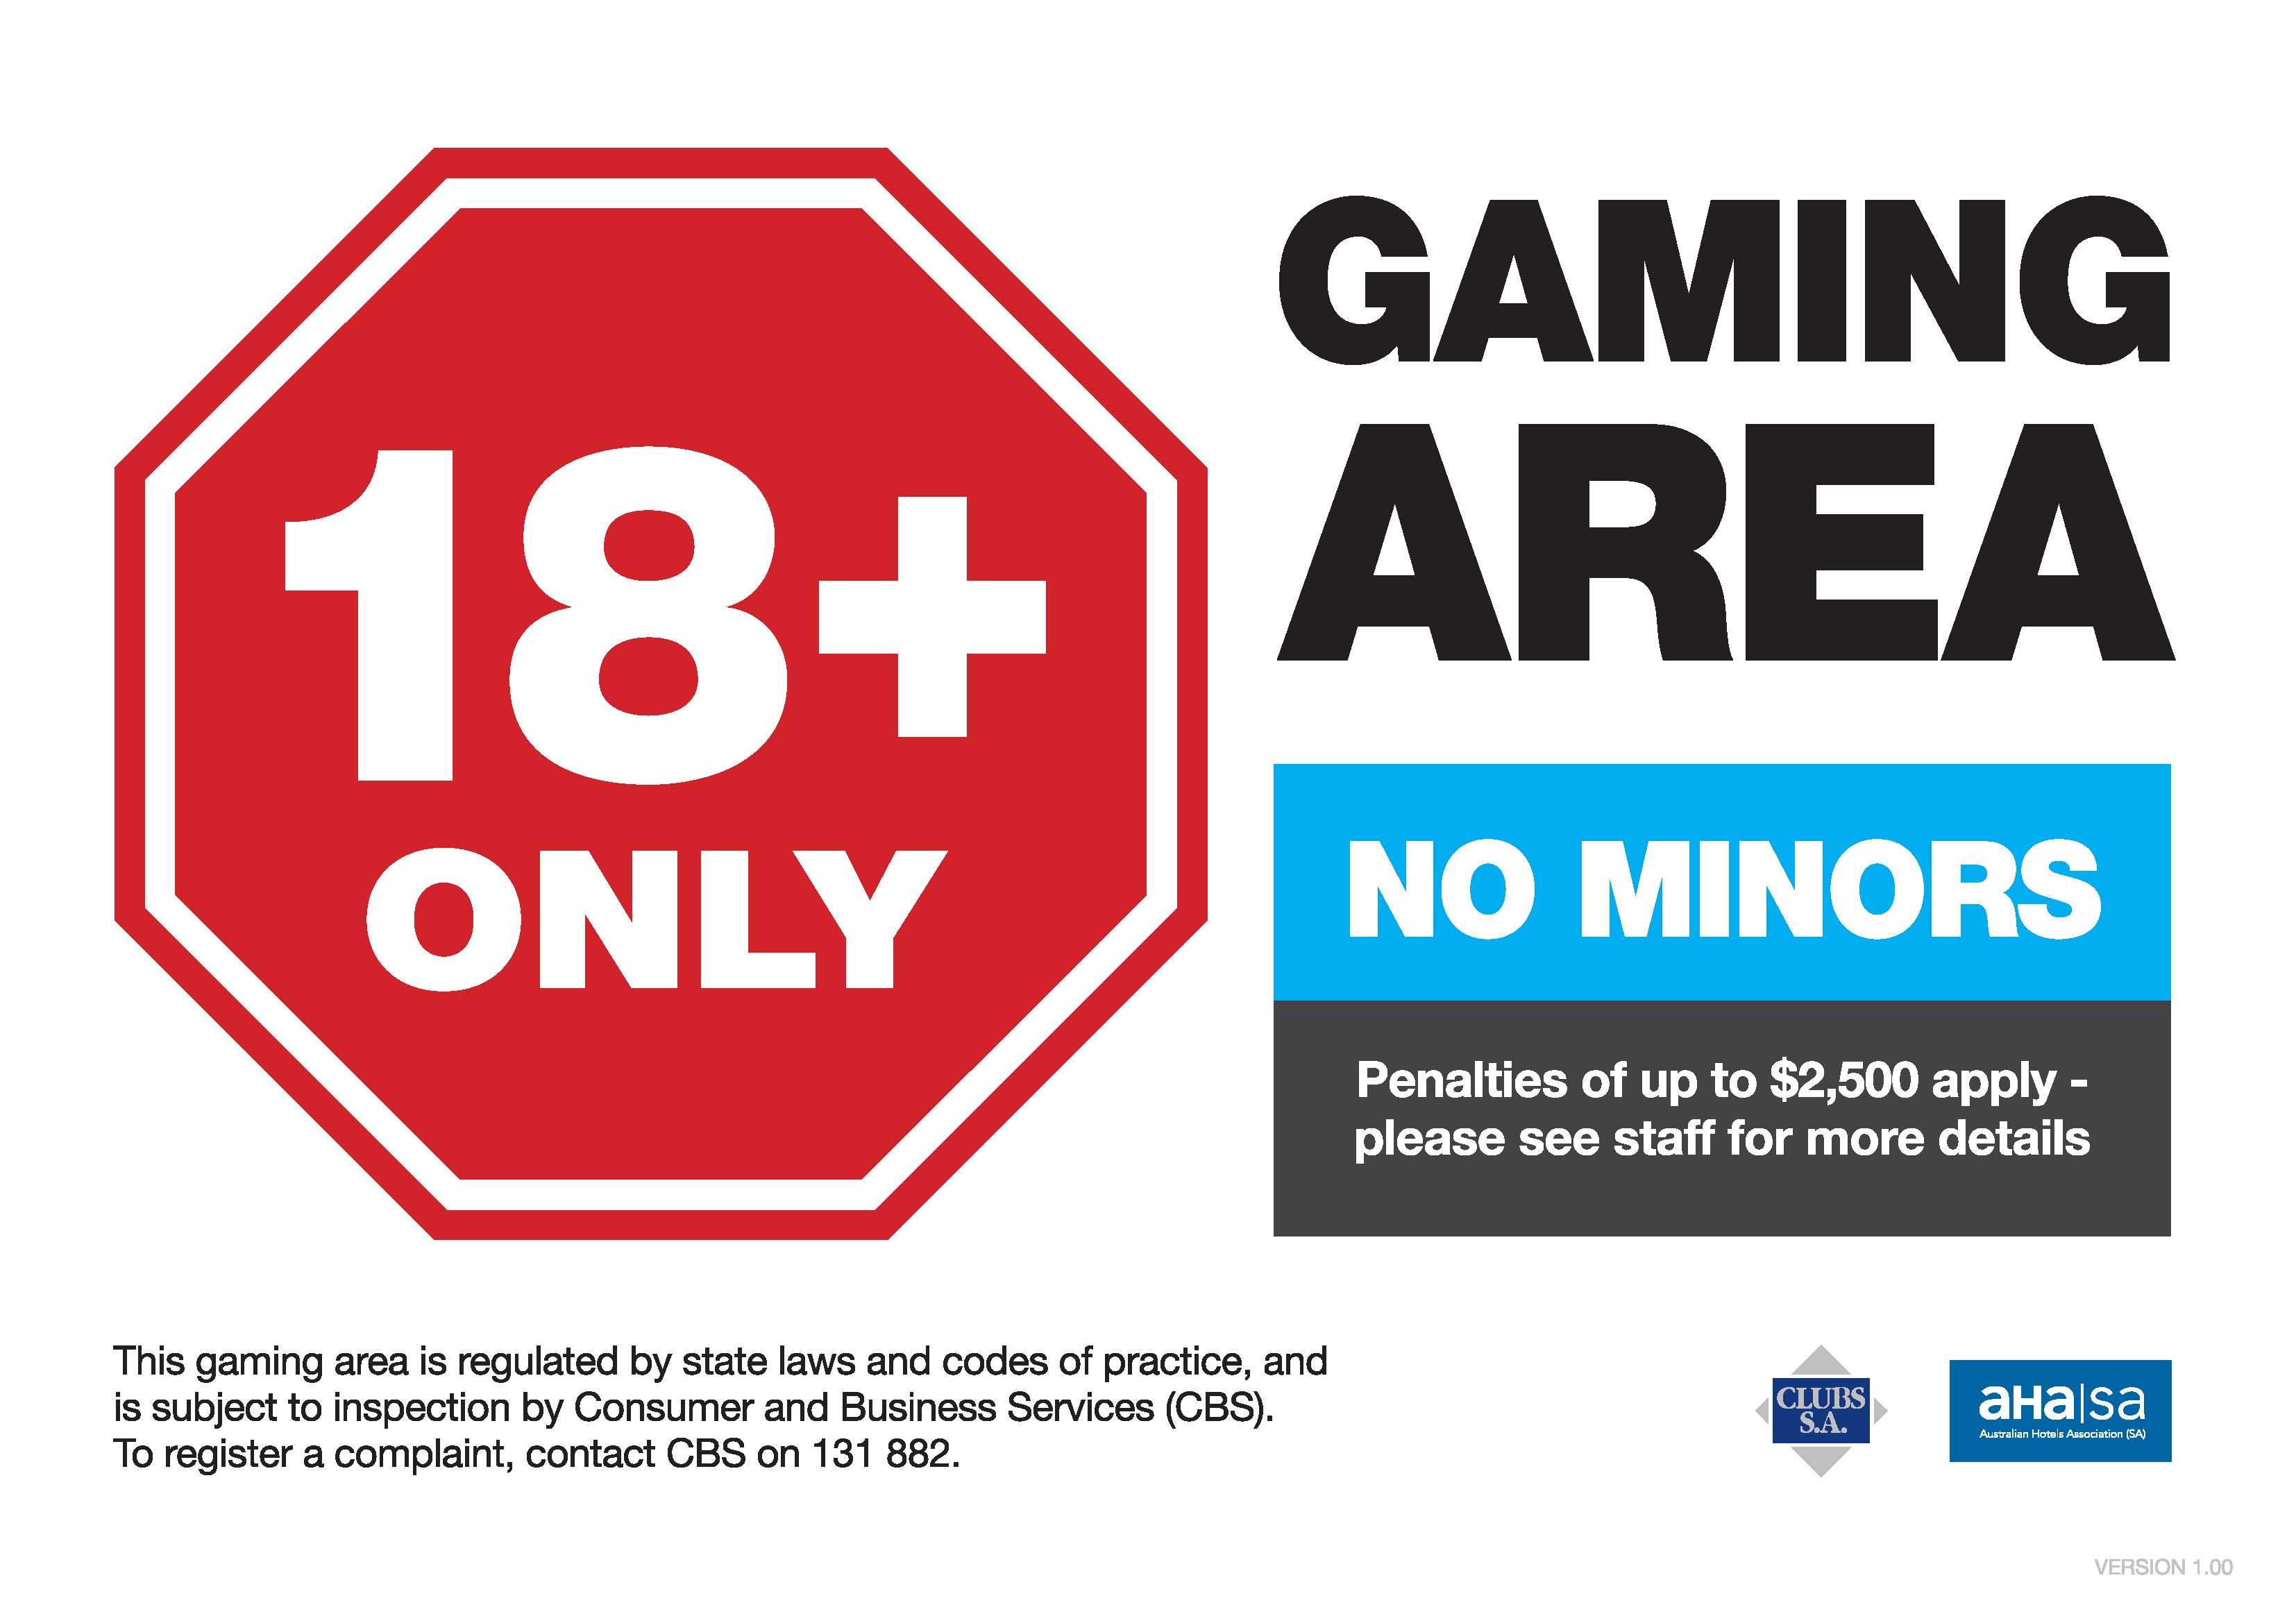 18+ only Gaming Area - No Minors (penalties of up to $2500 apply - please see our staff for more details)